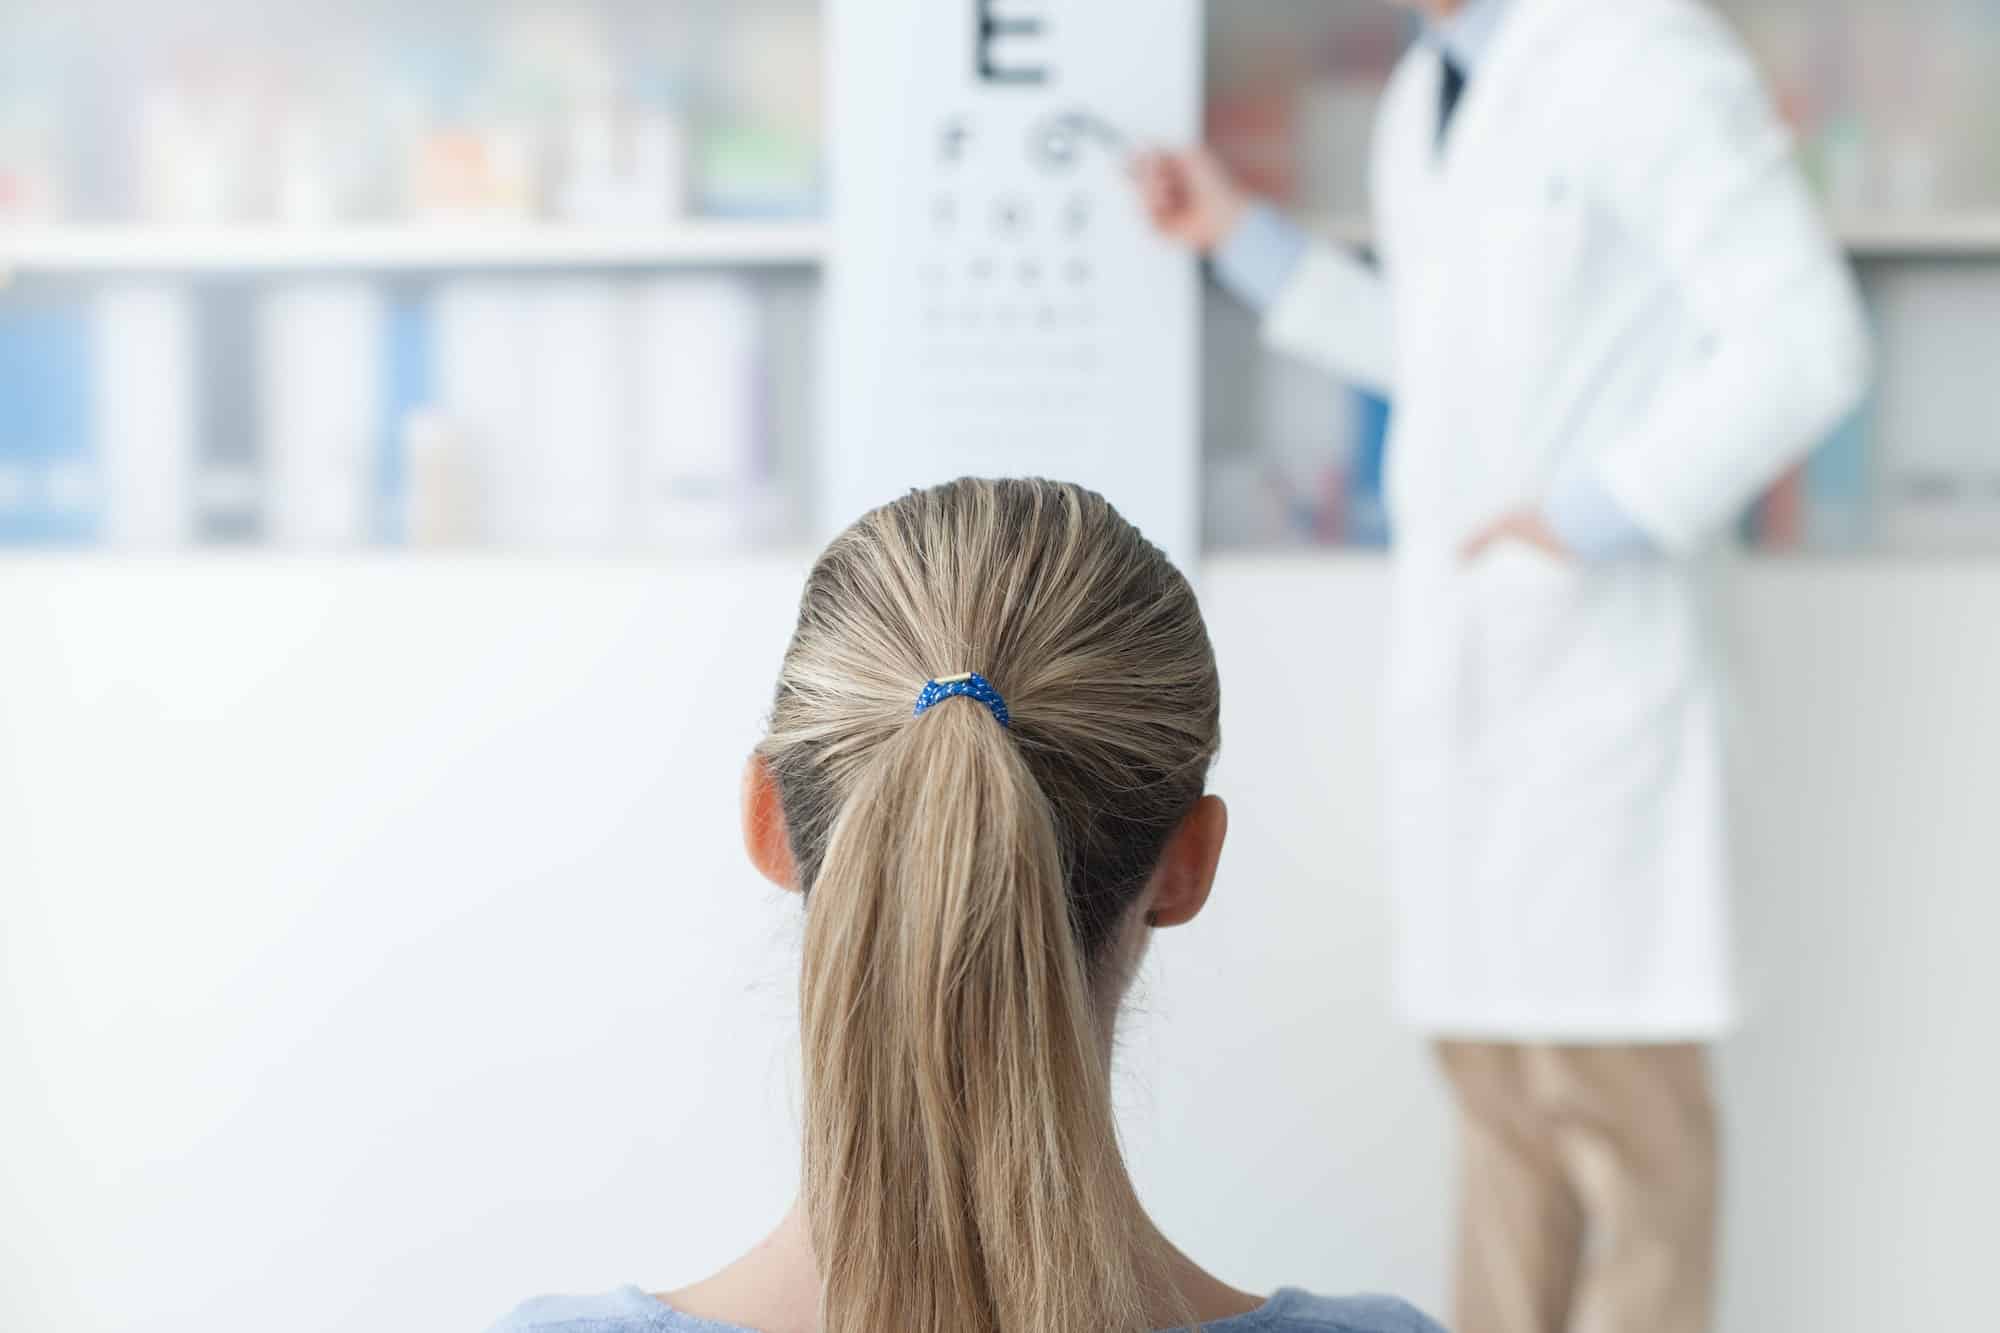 Exam with an eye doctor